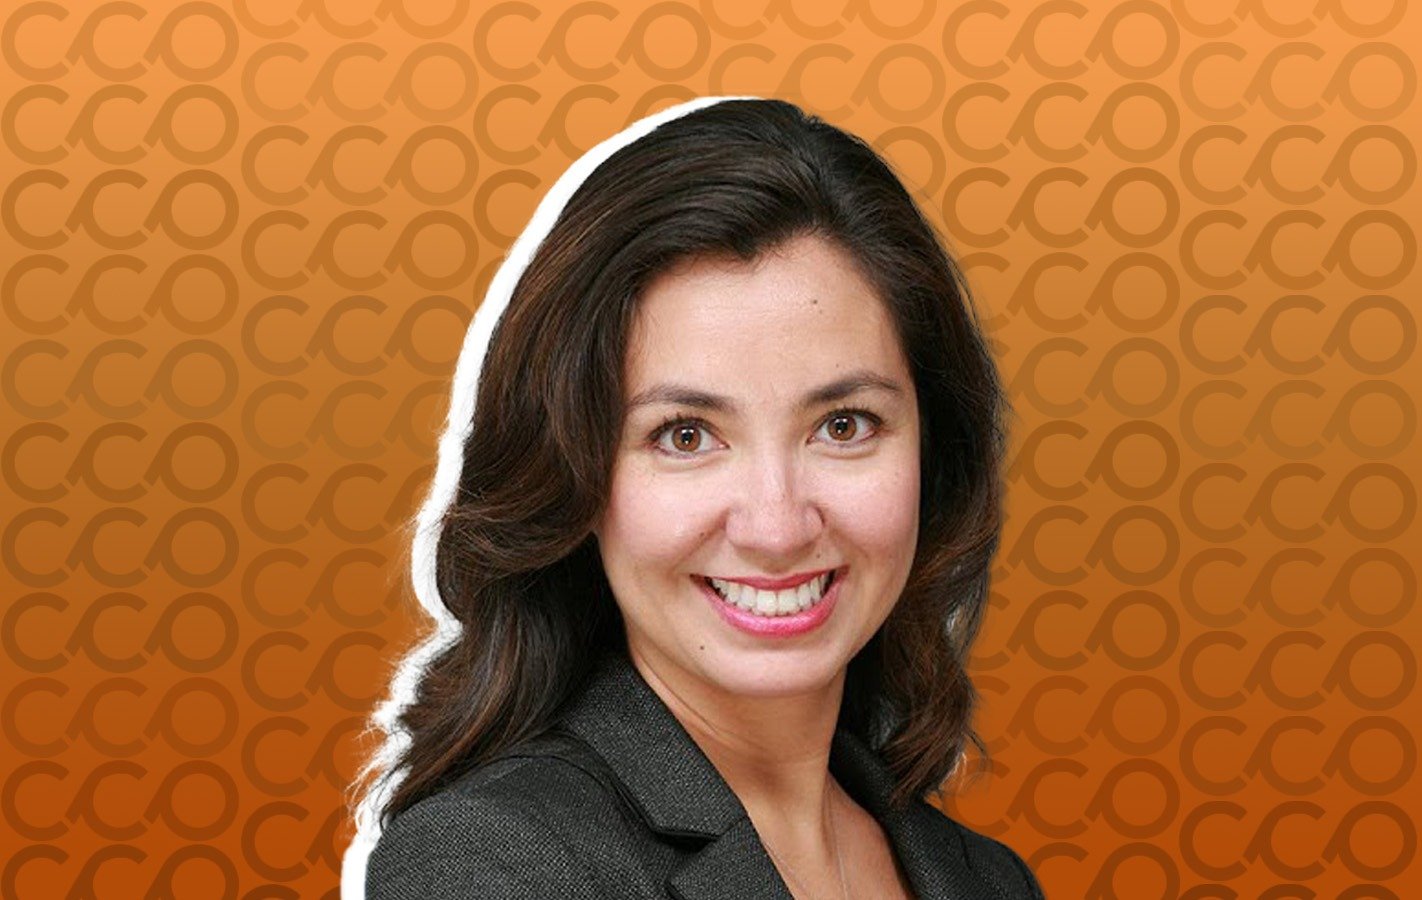 Daisy Hernandez, currently serving as the Chief Strategy and Operations Officer at Zuora